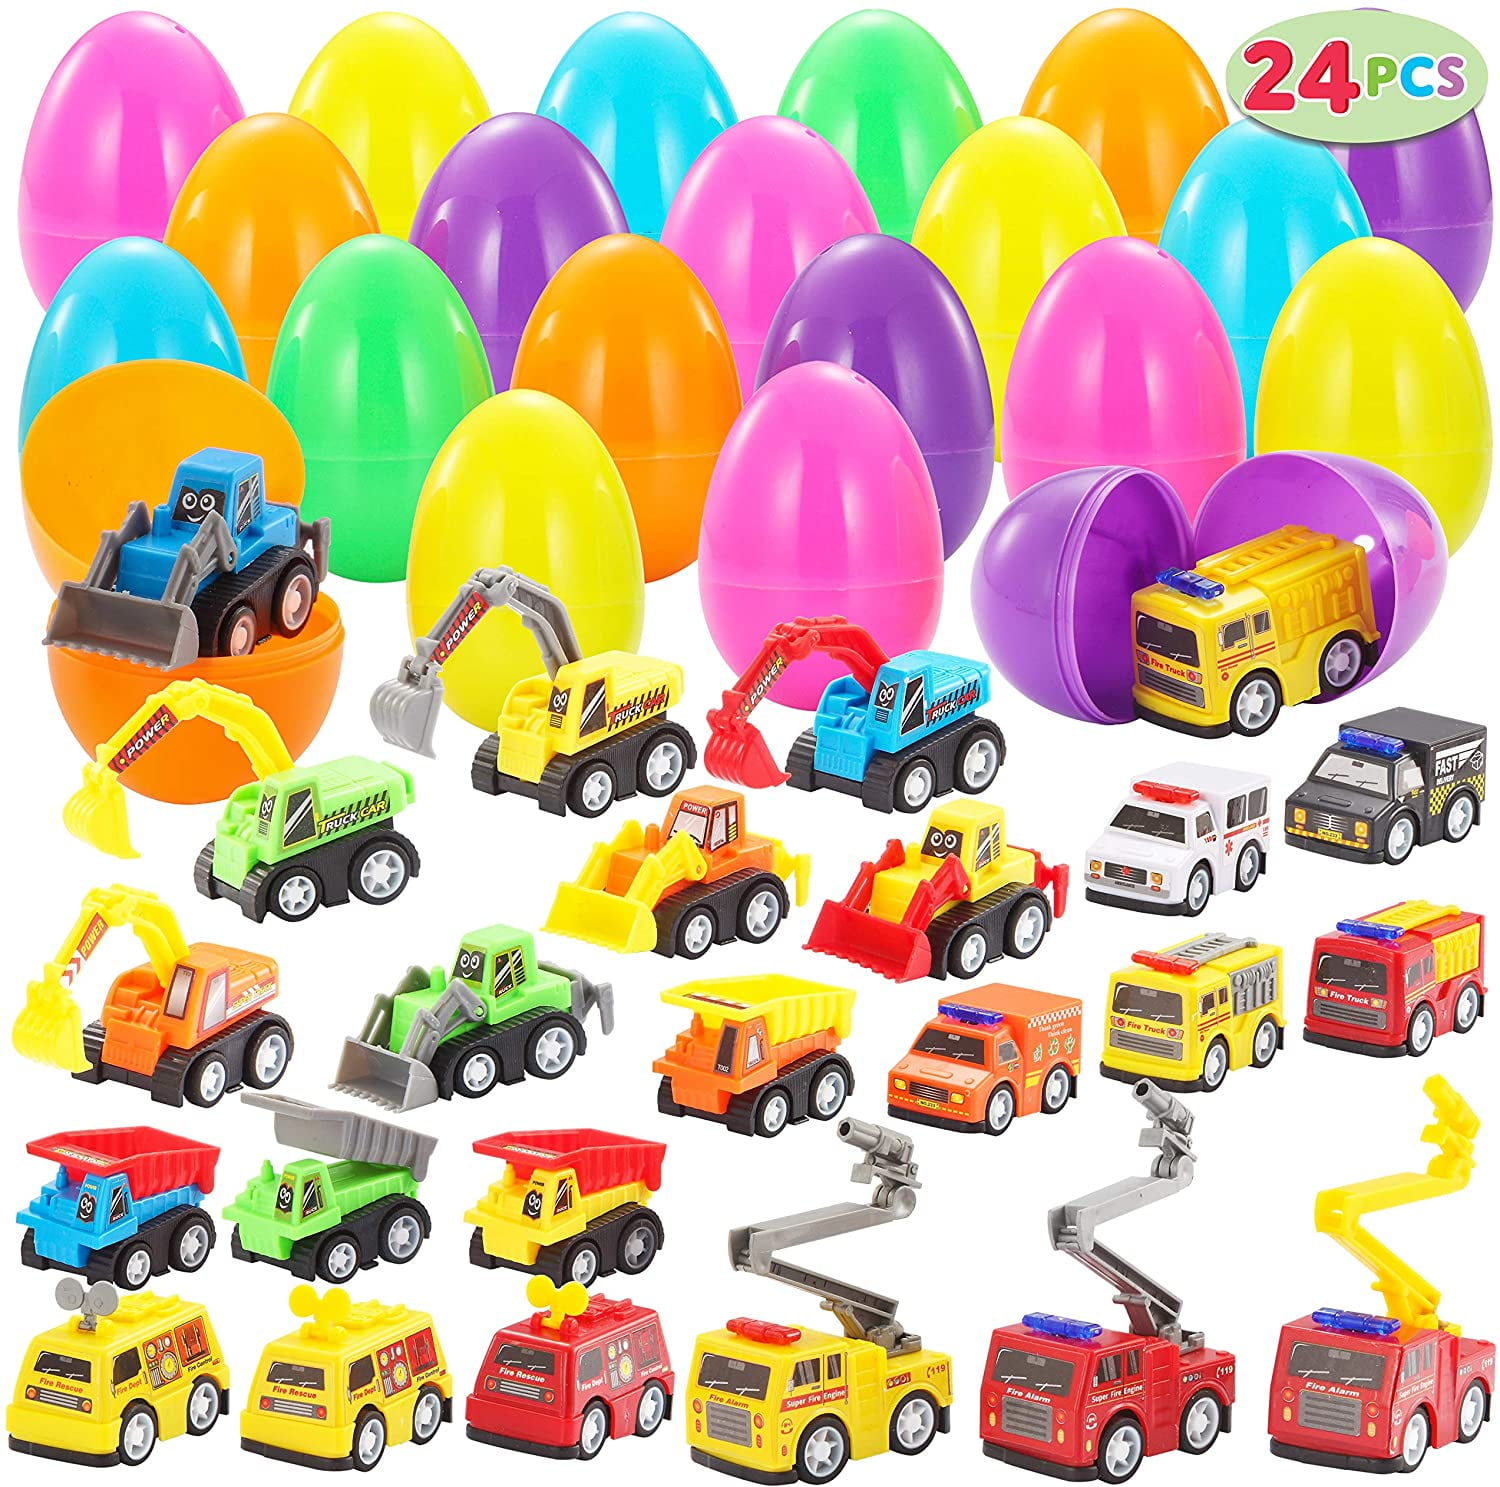 Easter Eggs Hunt Easter Basket Stuffers JOYIN Title: 12 Pcs Easter Eggs Prefilled with Vehicle Building Blocks for Easter Party Favors Classroom Prize Supplies 